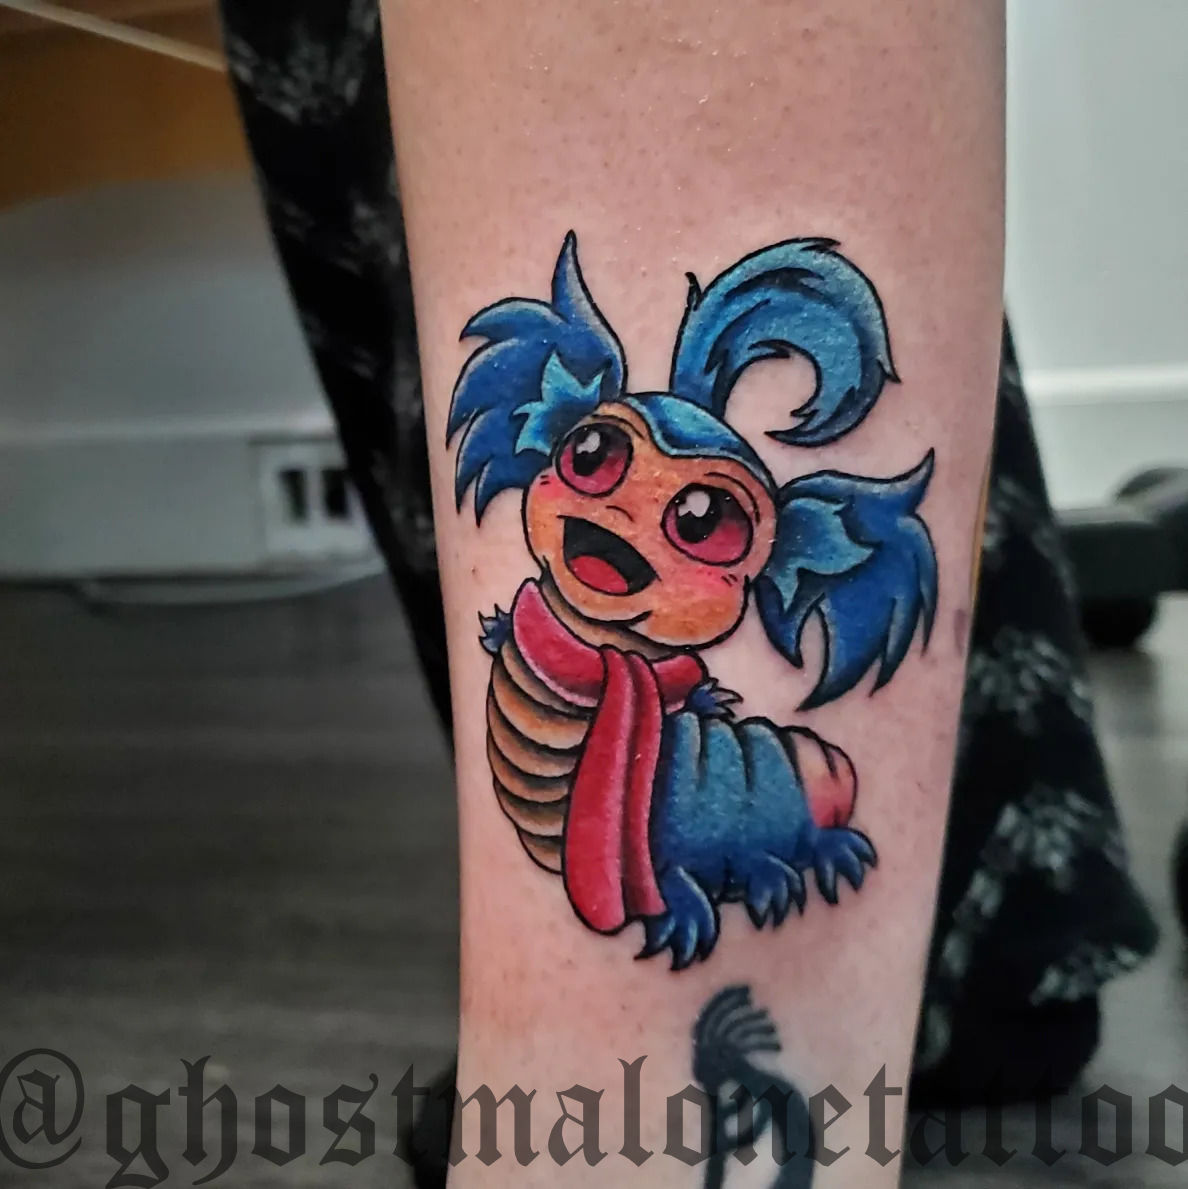 I got the worm from The Labyrinth done by Bill Fashbaugh at Marvel Tattoo  in South Bend Indiana  rtattoos